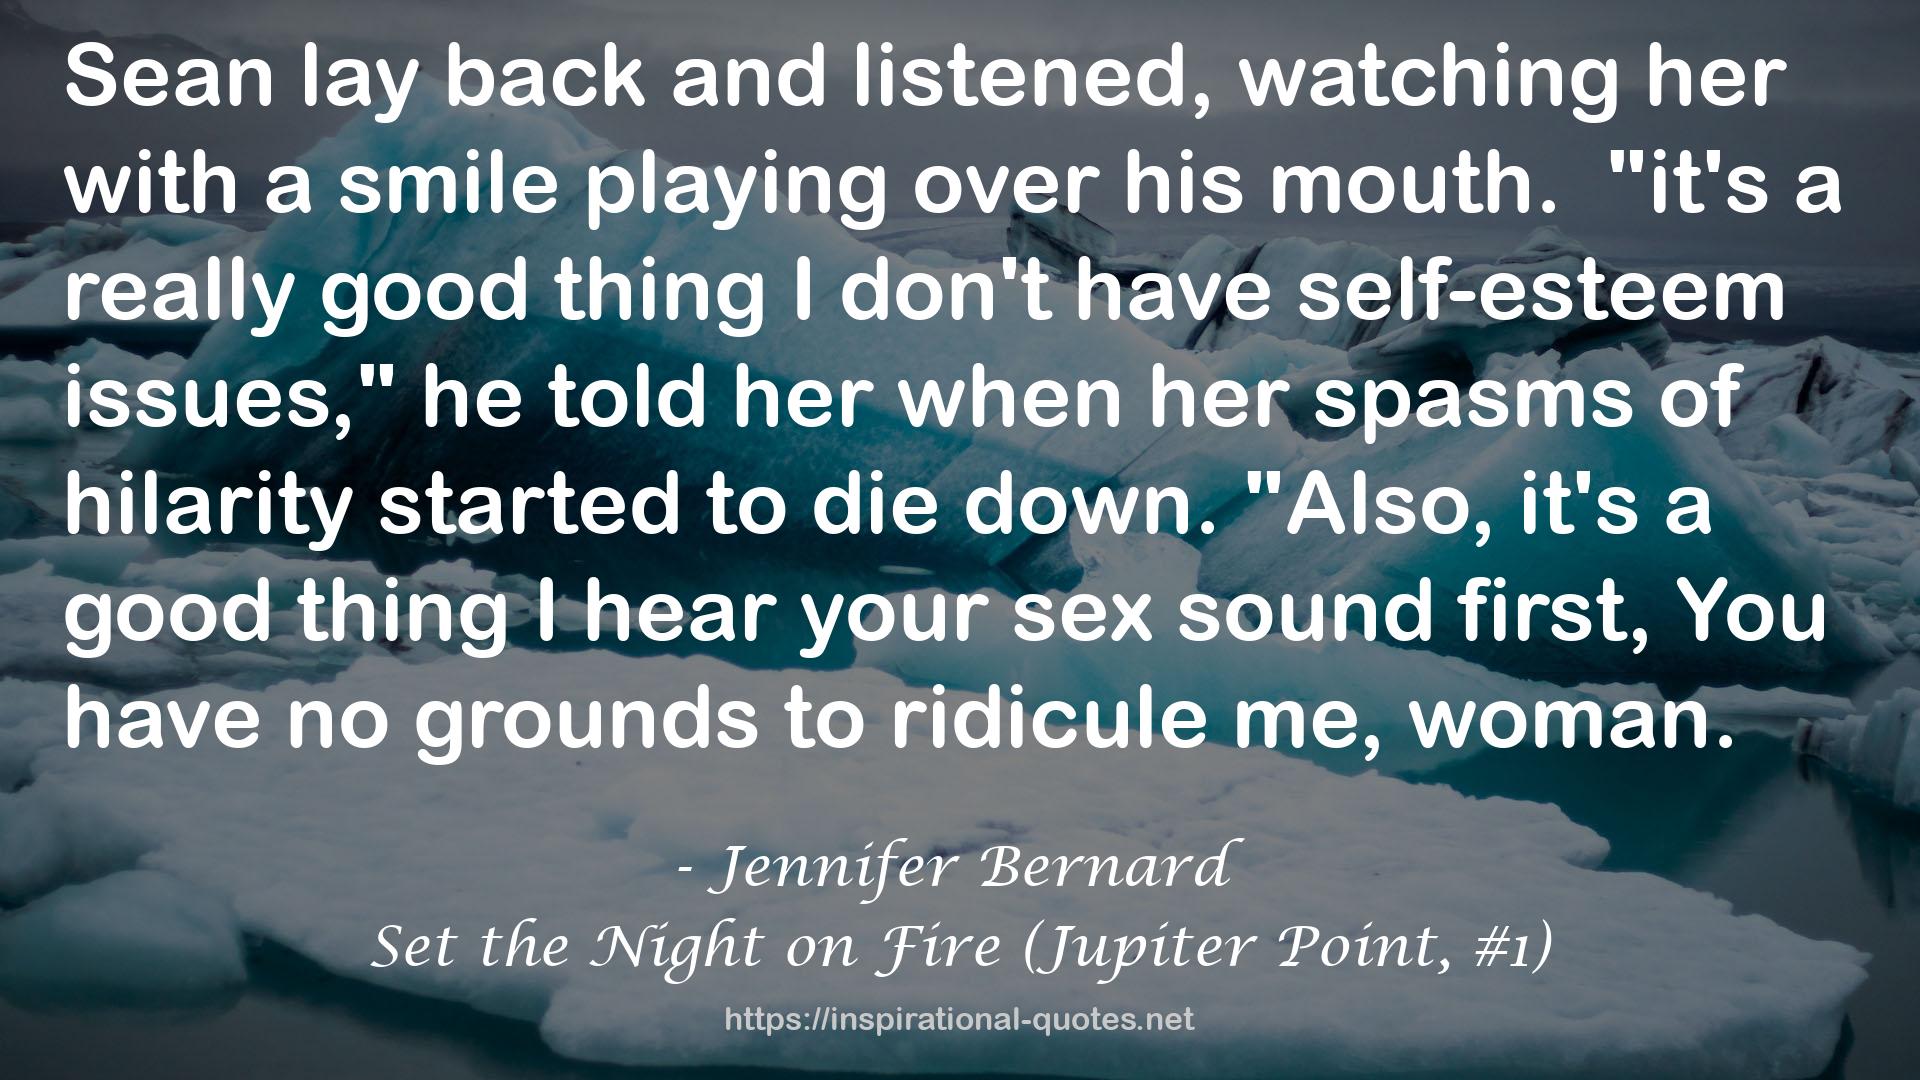 Set the Night on Fire (Jupiter Point, #1) QUOTES